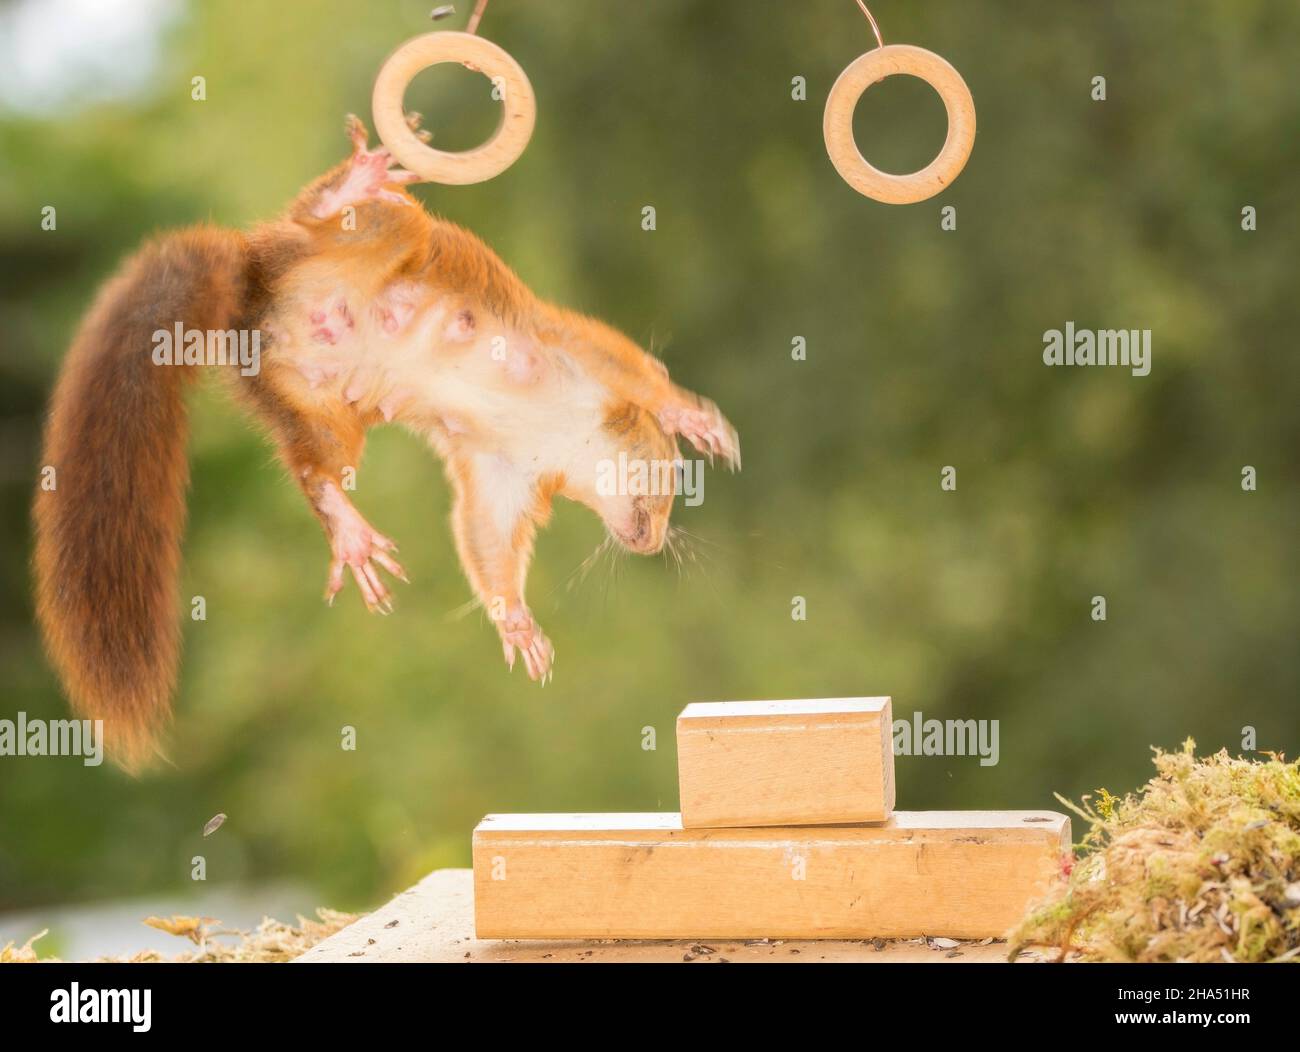 blurry red squirrel with head in focus is jumping in the air with rings Stock Photo